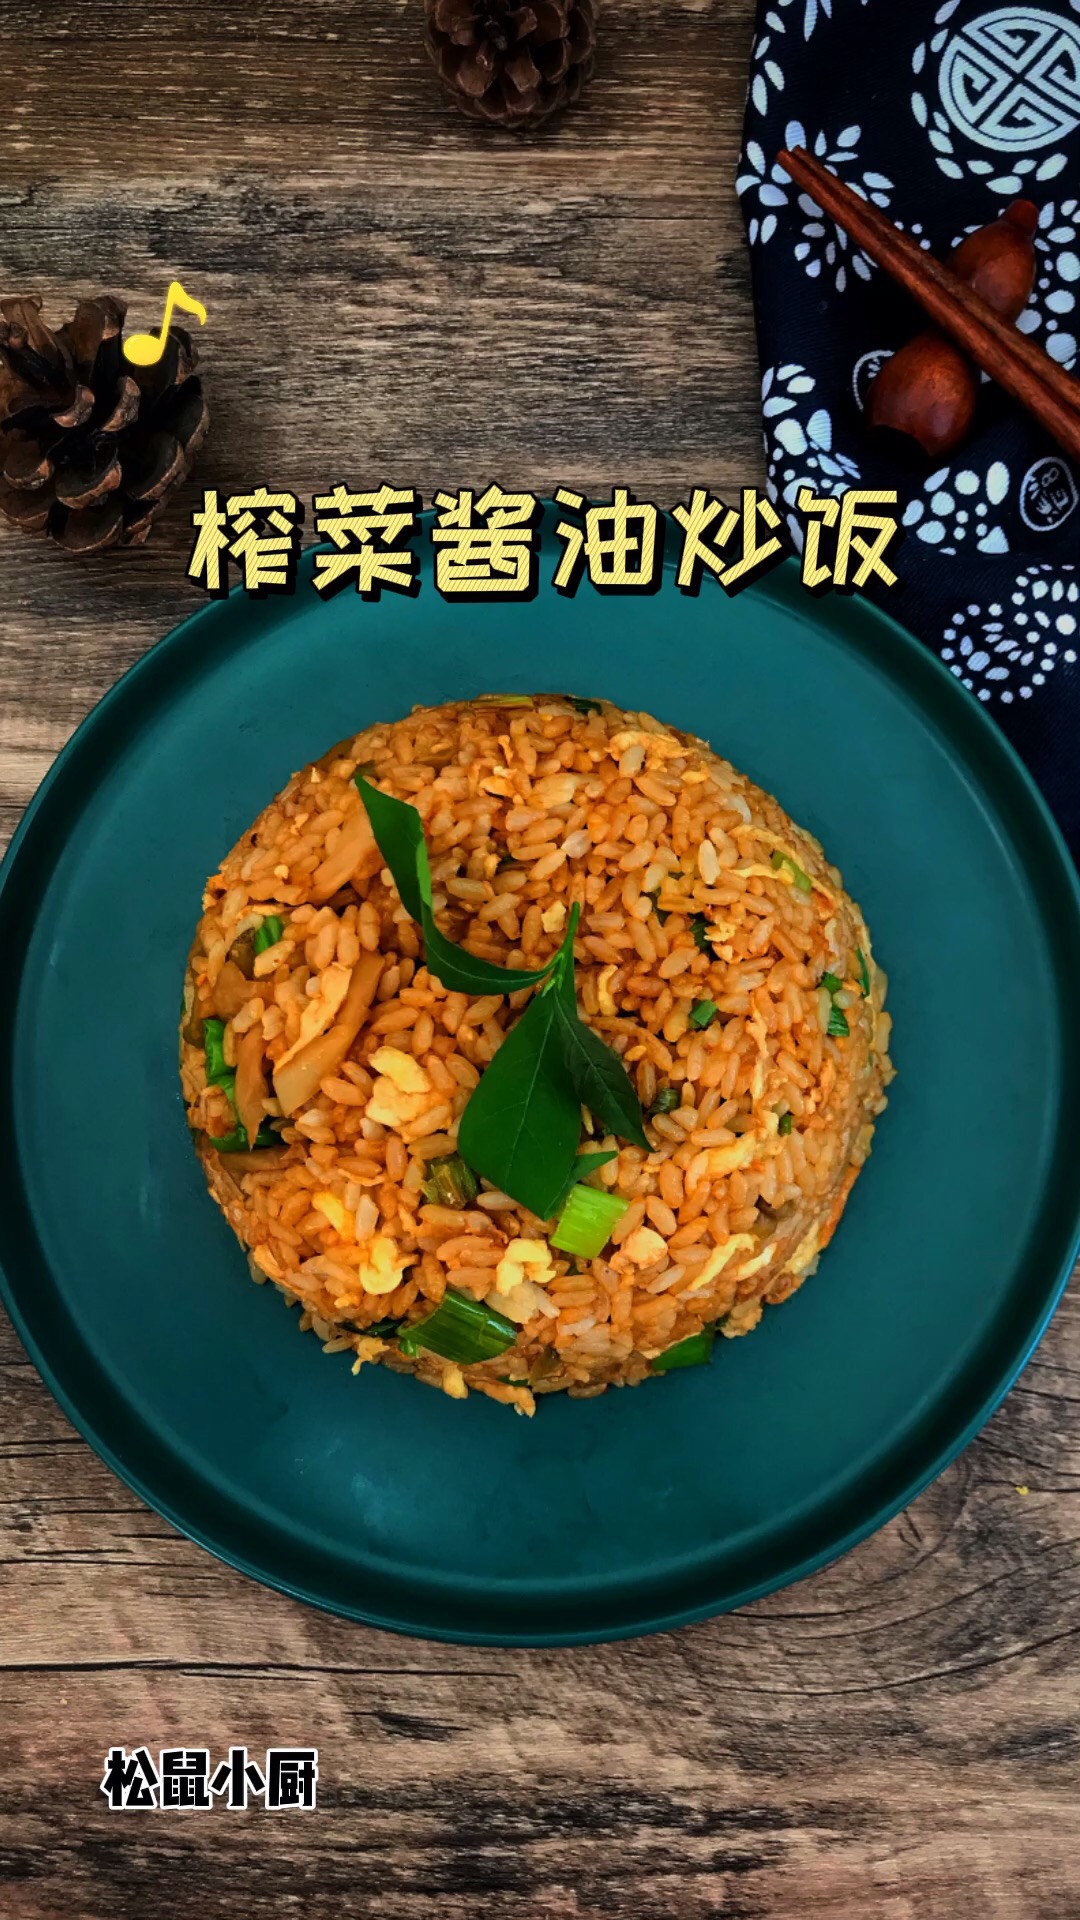 Fried Rice with Mustard and Soy Sauce recipe